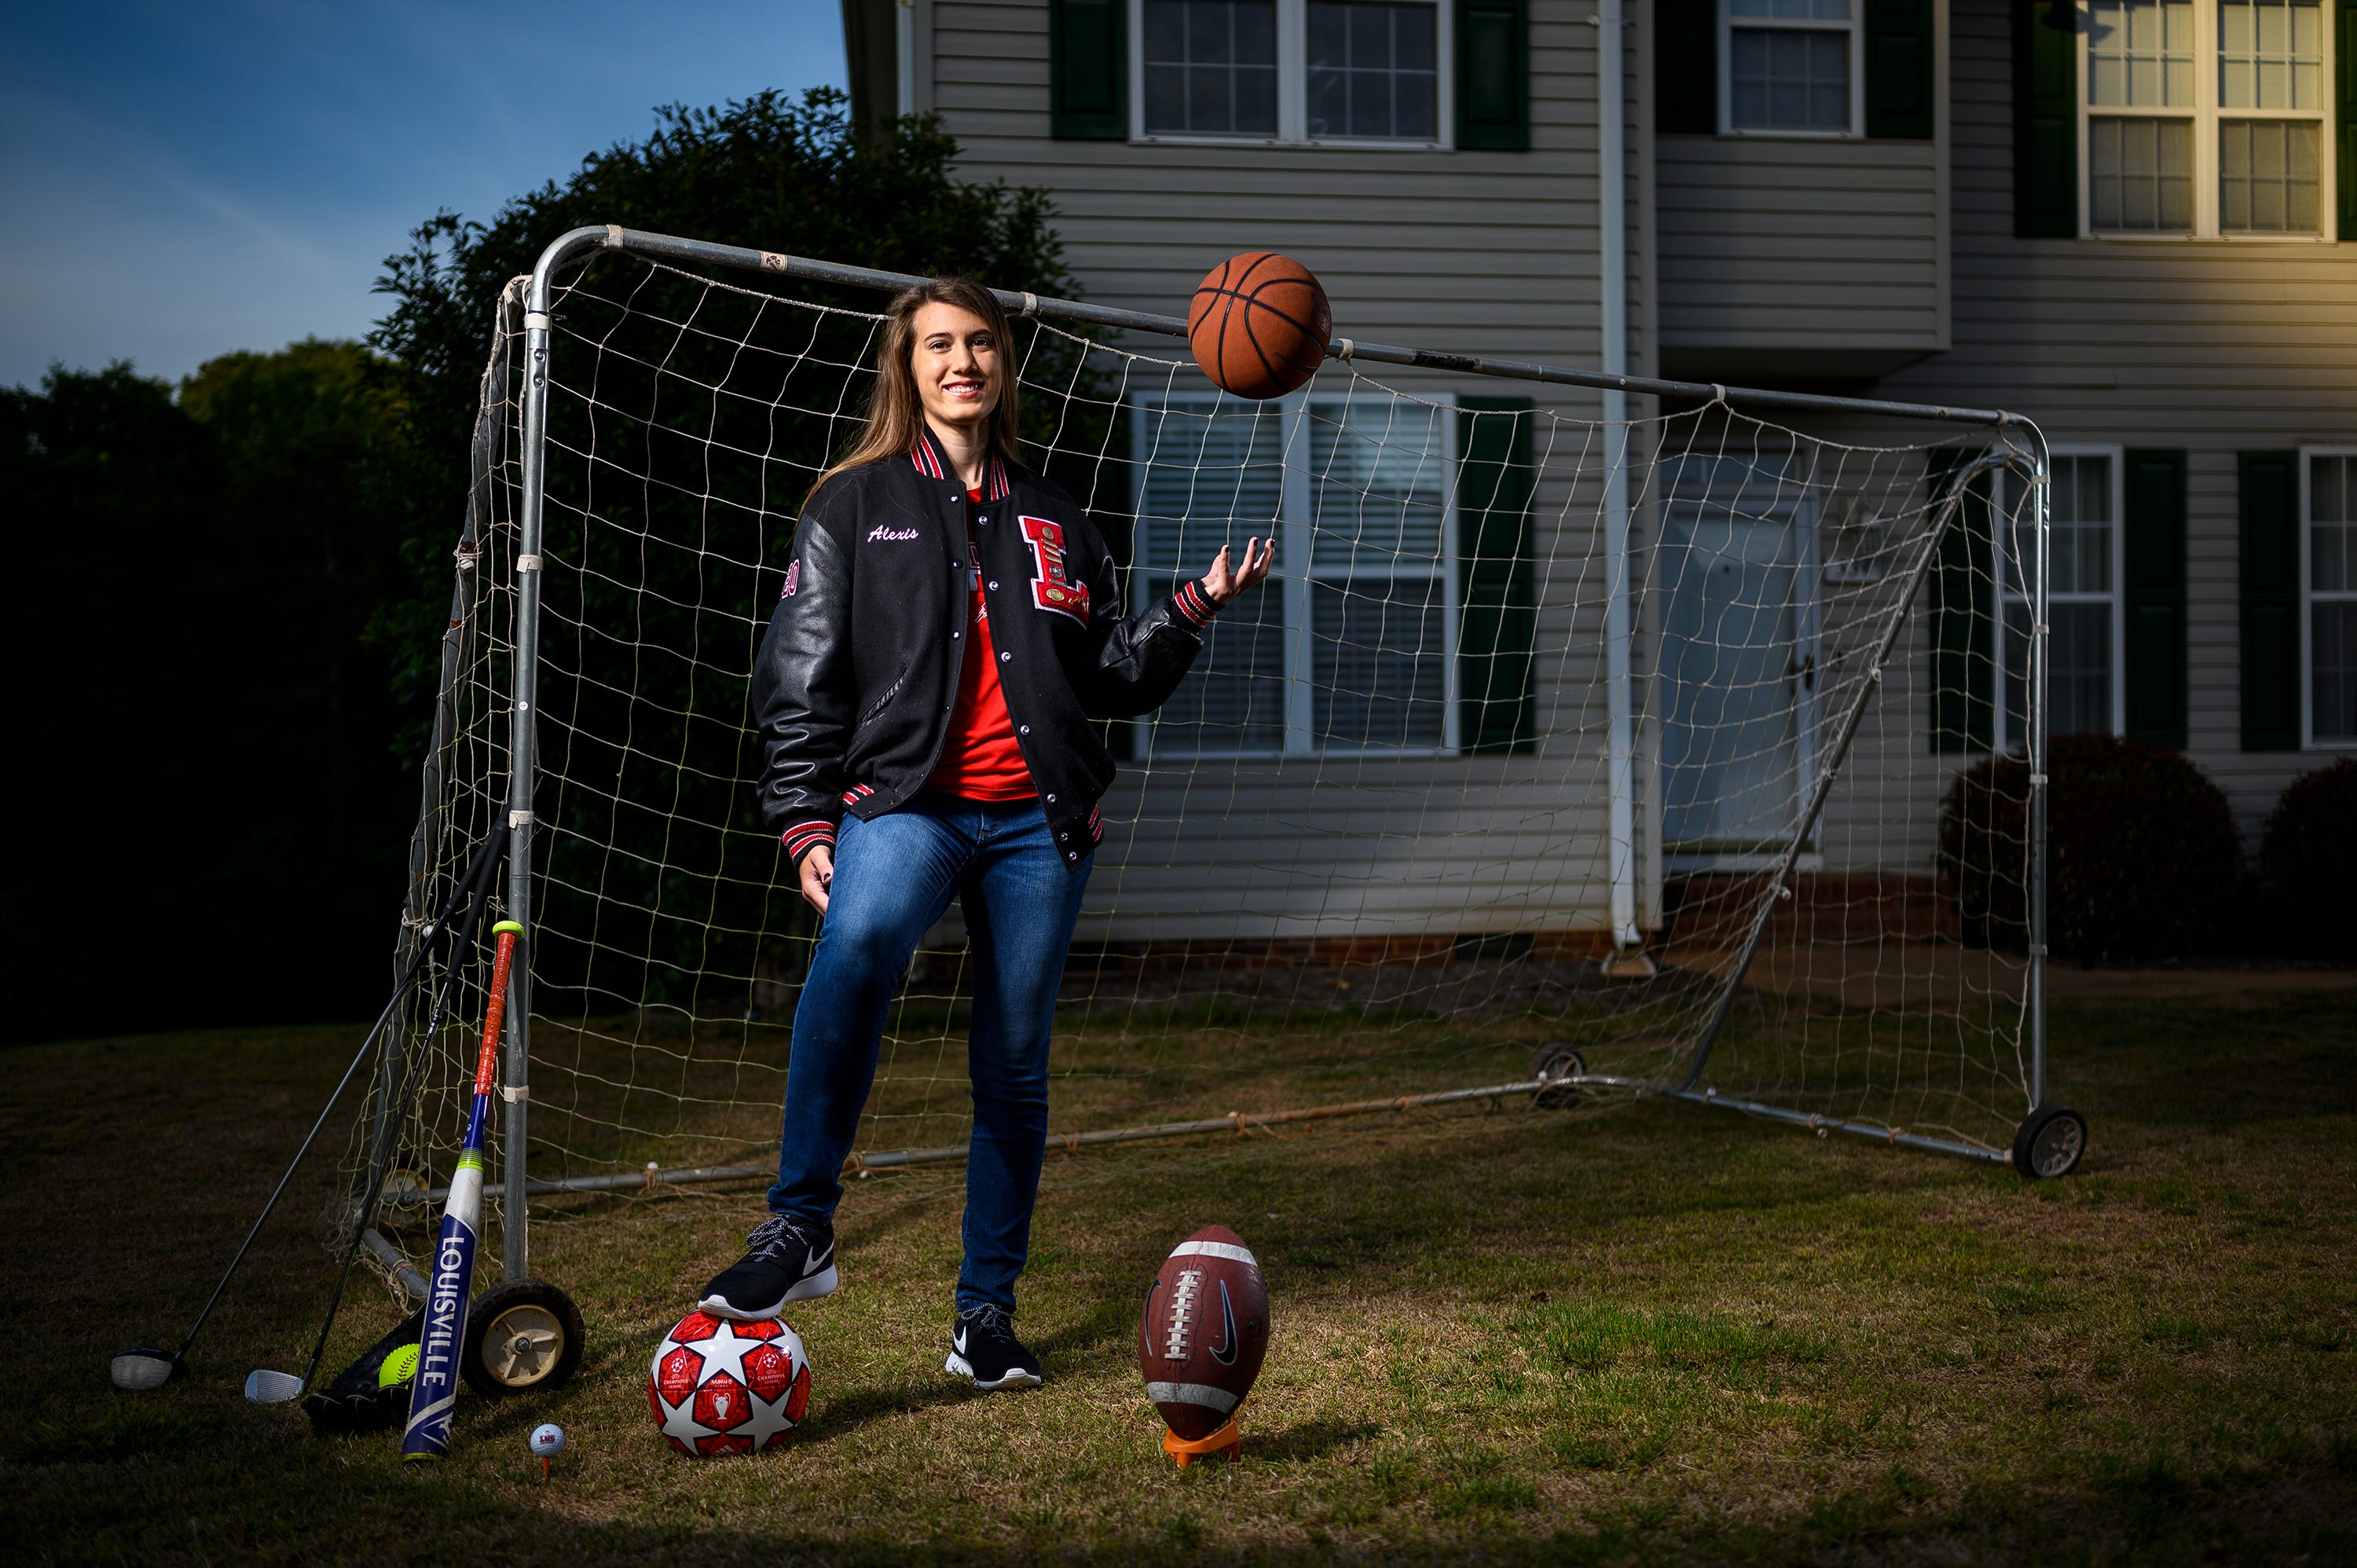 Liberty High School's Alexis Holliday poses for a portrait in front of her home Tuesday, May 12, 2020. Holliday is the 2019-20 All Upstate female athlete of the year.